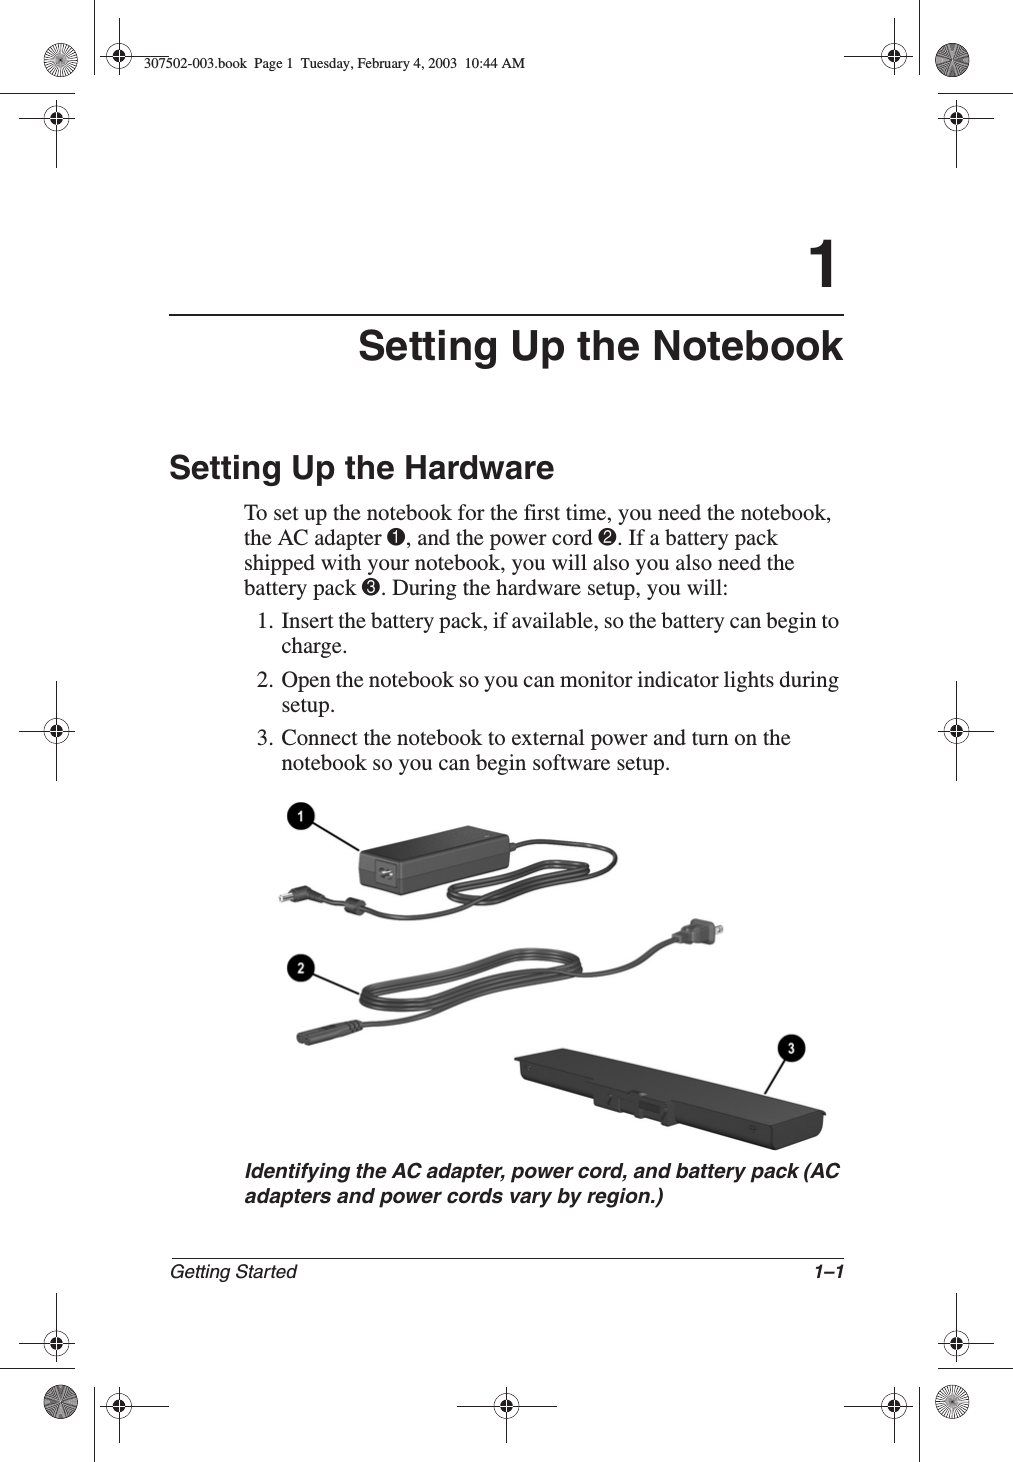 Getting Started 1–11Setting Up the NotebookSetting Up the HardwareTo set up the notebook for the first time, you need the notebook, the AC adapter 1, and the power cord 2. If a battery pack shipped with your notebook, you will also you also need the battery pack 3. During the hardware setup, you will:1. Insert the battery pack, if available, so the battery can begin to charge.2. Open the notebook so you can monitor indicator lights during setup.3. Connect the notebook to external power and turn on the notebook so you can begin software setup.Identifying the AC adapter, power cord, and battery pack (ACadapters and power cords vary by region.)307502-003.book  Page 1  Tuesday, February 4, 2003  10:44 AM